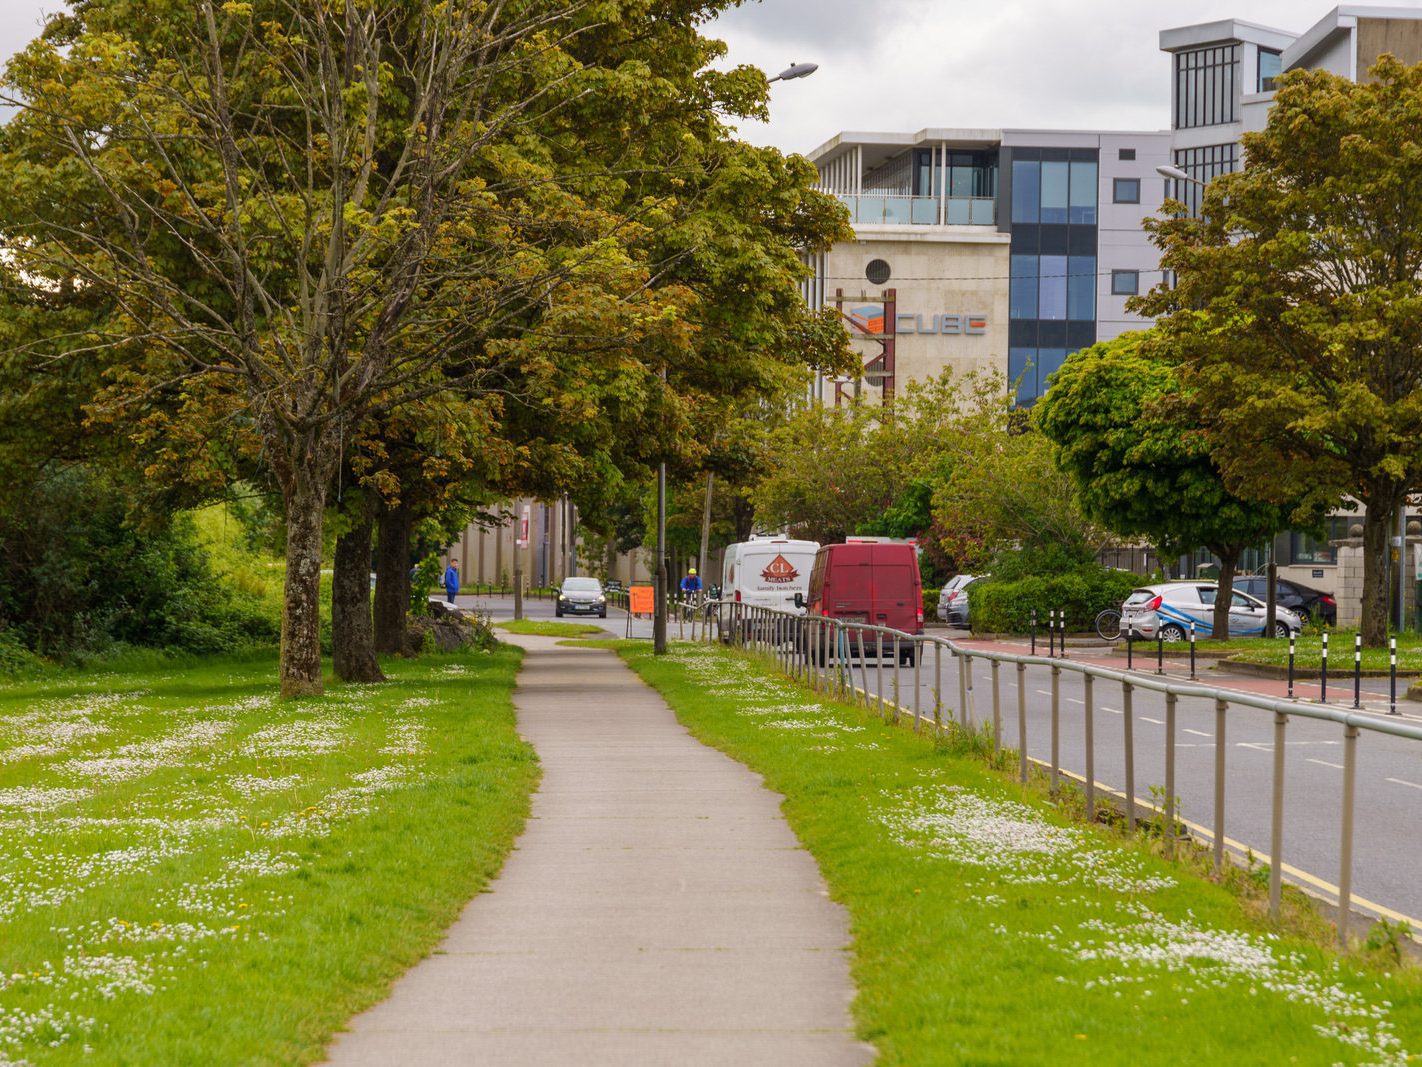 MONAHAN ROAD IN THE DOCKLANDS AREA OF CORK CITY [12 MAY 2022] 015